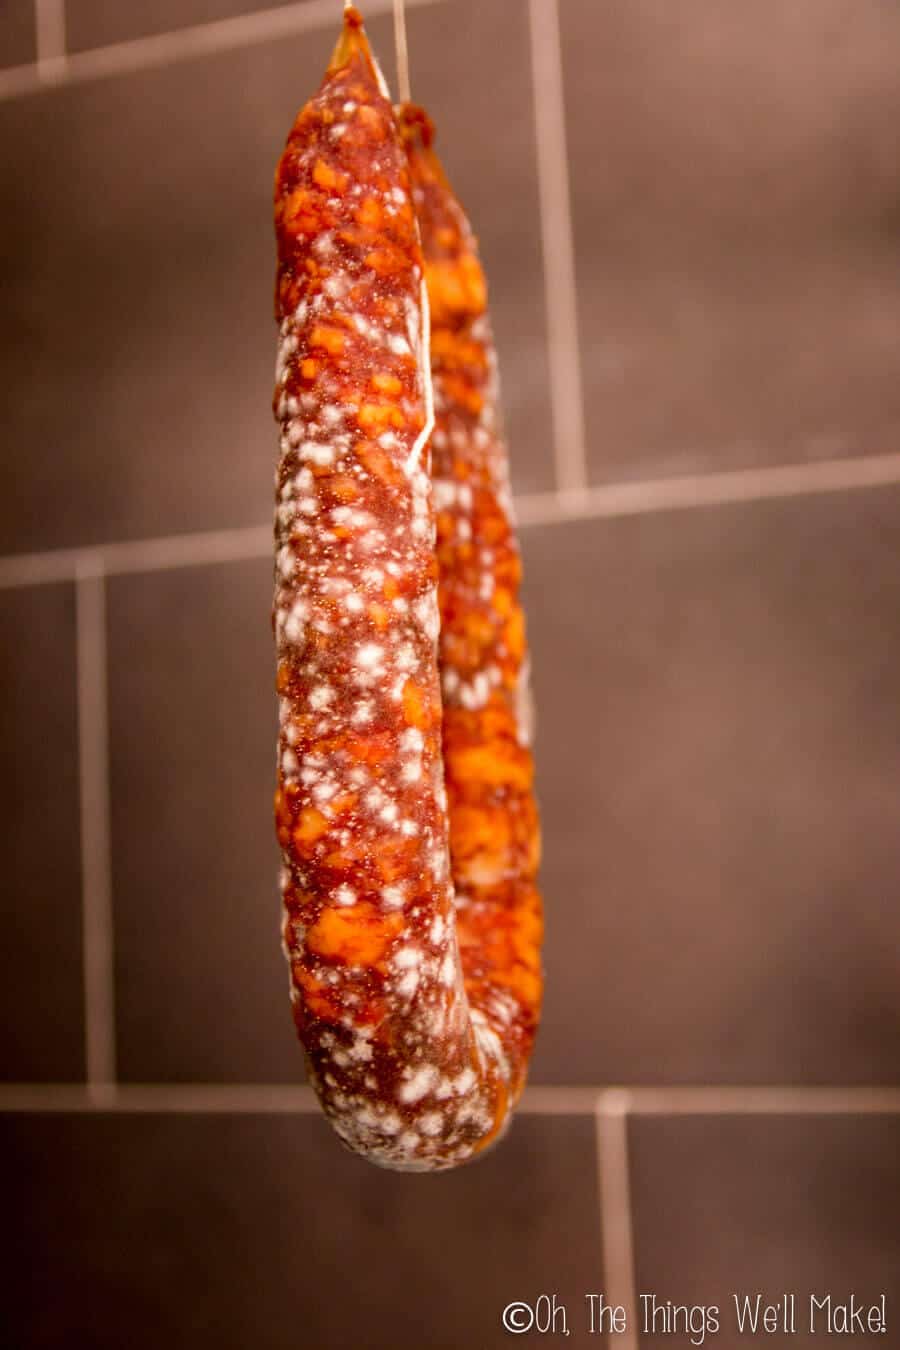 Chorizo with a white, powdery mold beginning to form.